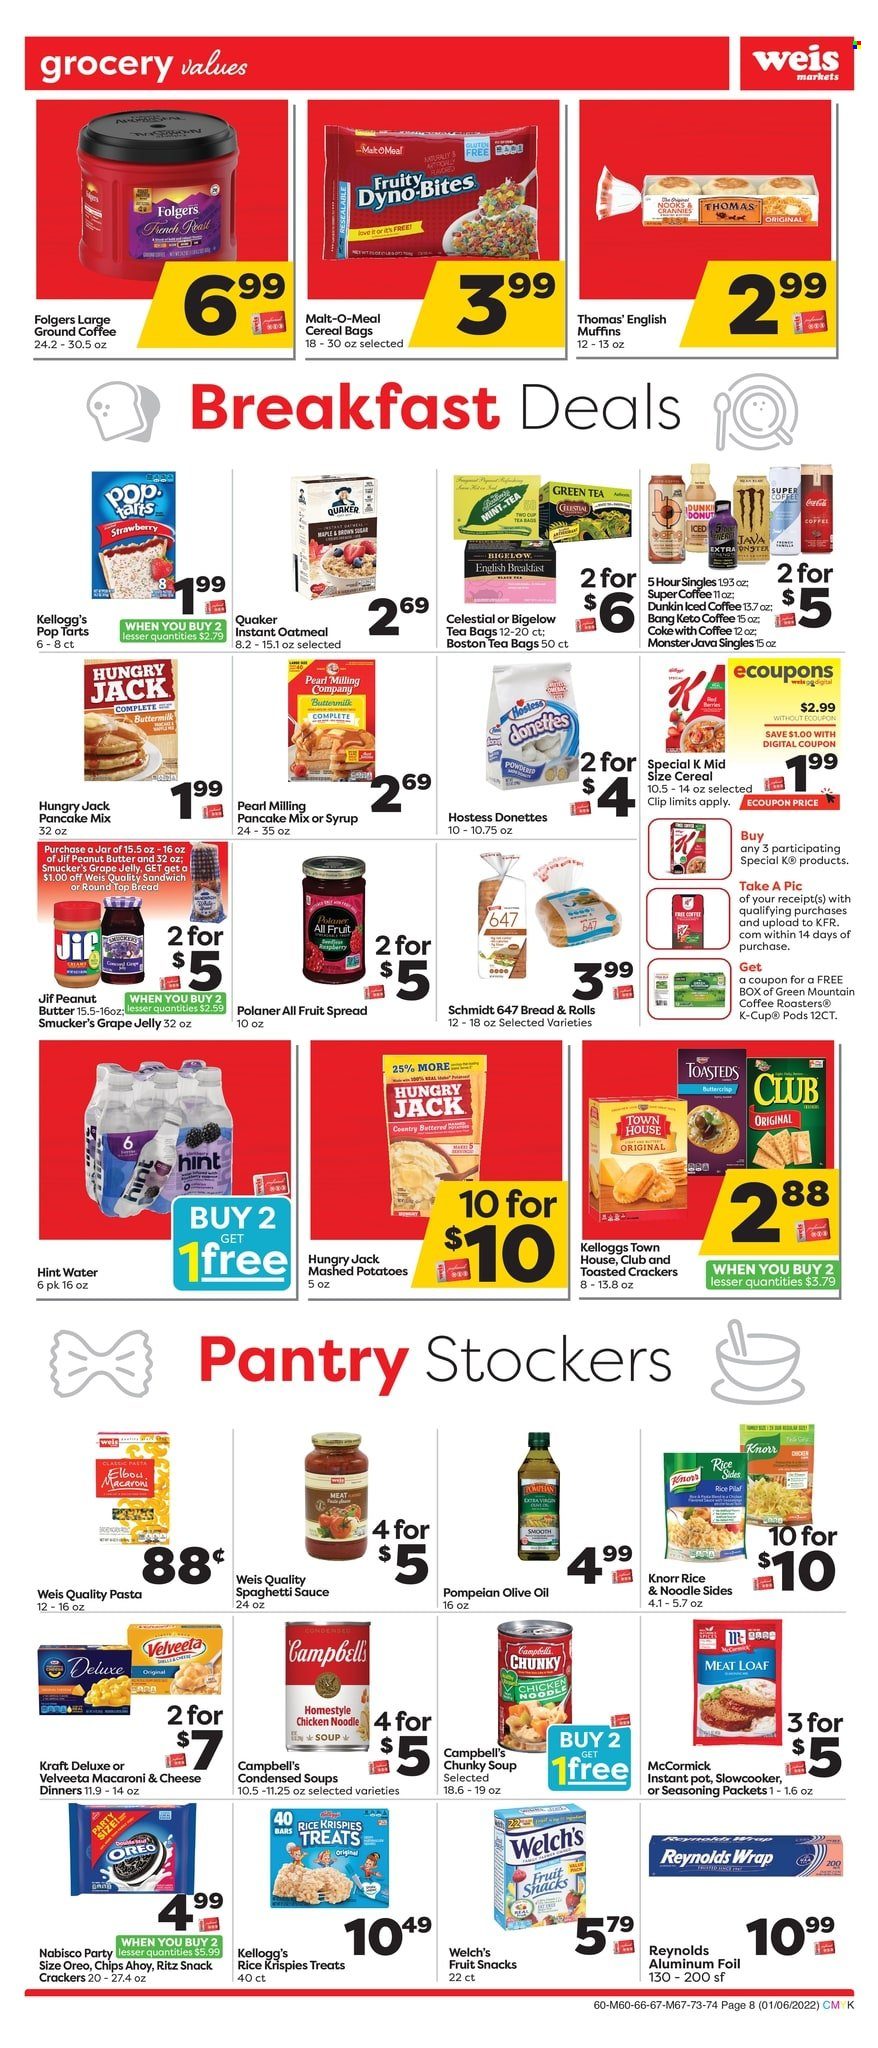 thumbnail - Weis Flyer - 01/06/2022 - 02/03/2022 - Sales products - bread, english muffins, donut, Welch's, Campbell's, macaroni & cheese, mashed potatoes, spaghetti, soup, pasta, Knorr, sauce, pancakes, Quaker, noodles, Kraft®, spaghetti sauce, Oreo, buttermilk, jelly, crackers, Kellogg's, Pop-Tarts, fruit snack, RITZ, chips, oatmeal, malt, cereals, Rice Krispies, spice, olive oil, grape jelly, peanut butter, Jif, Coca-Cola, Monster, iced coffee, green tea, tea bags, Folgers, ground coffee, coffee capsules, K-Cups, Green Mountain, pot, aluminium foil, jar. Page 7.